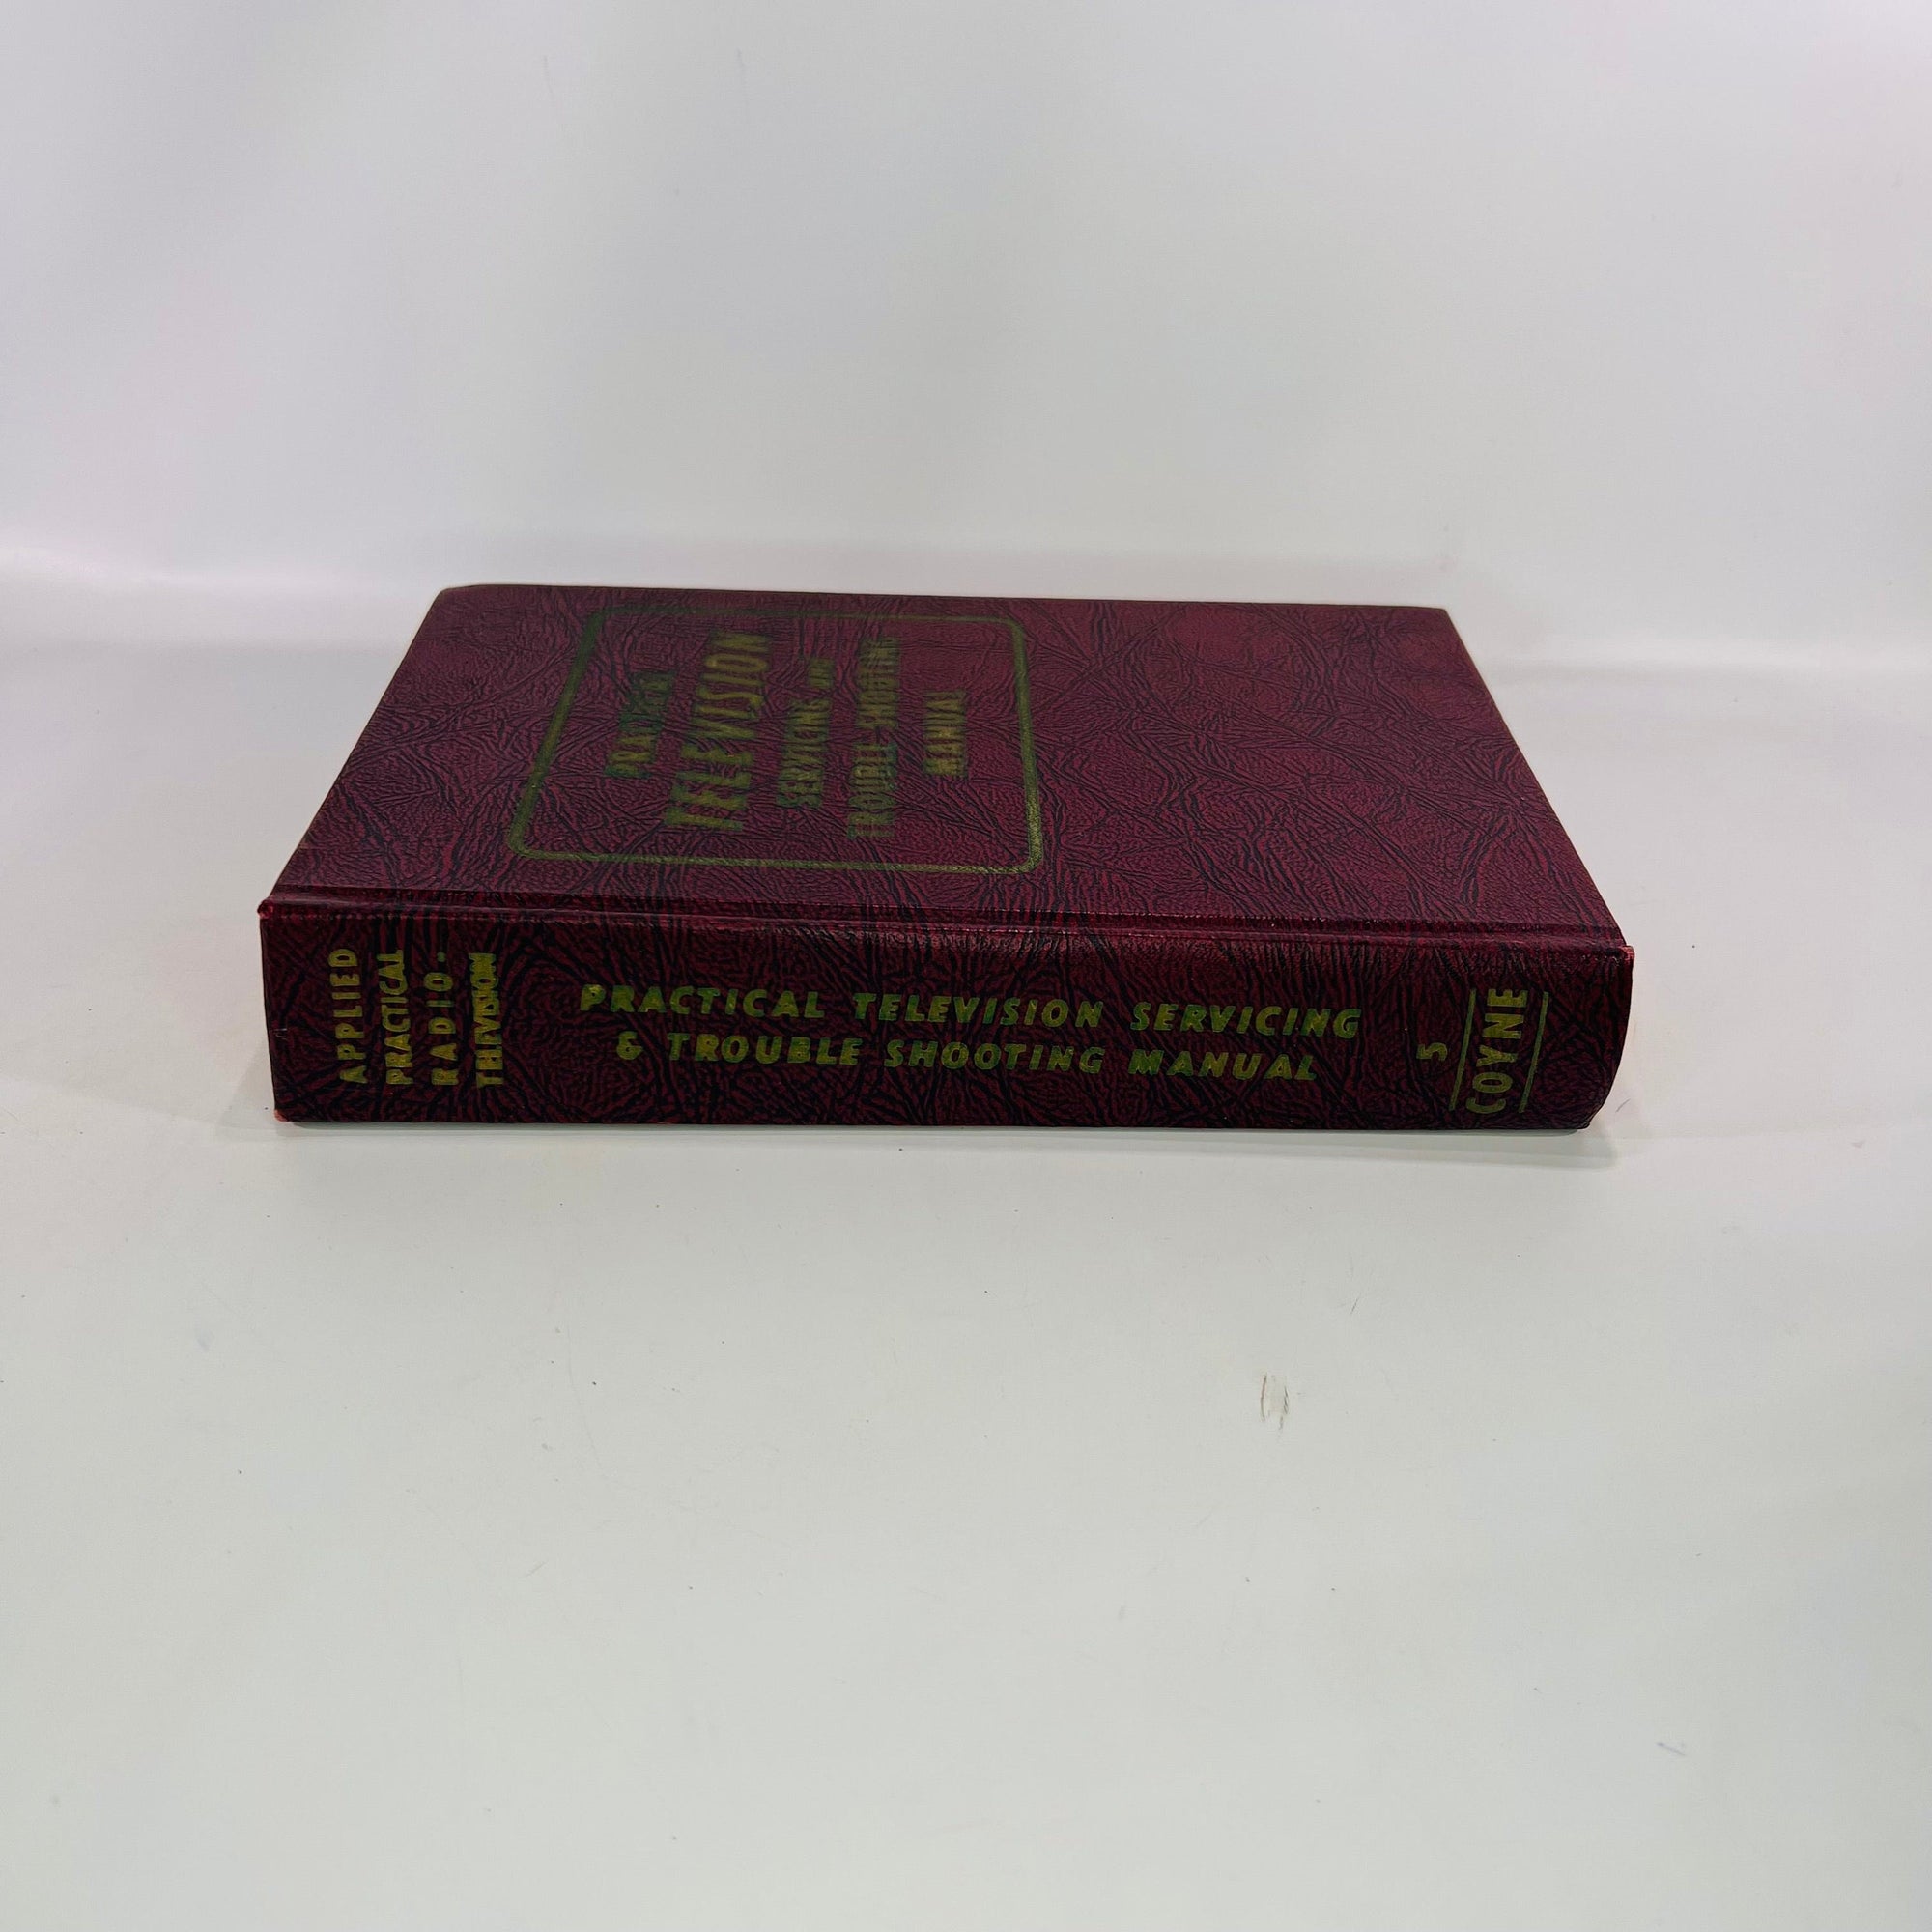 Practical Television Servicing & Trouble Shooting Manual by Technical Staff 1957 Book Number Three Coyne Electrical and Radio School